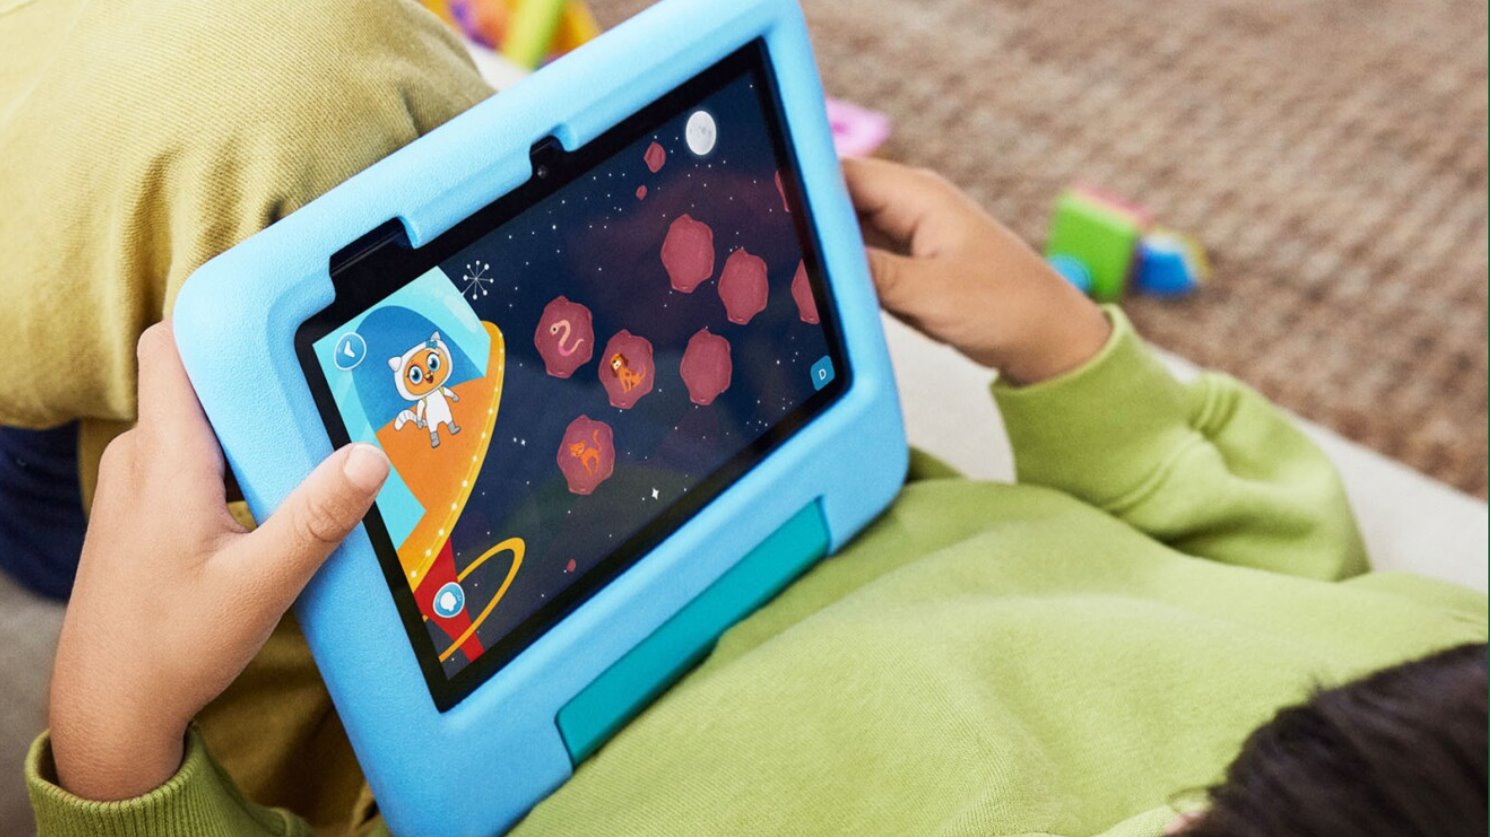 How To Set Up Fire Tablet For Child